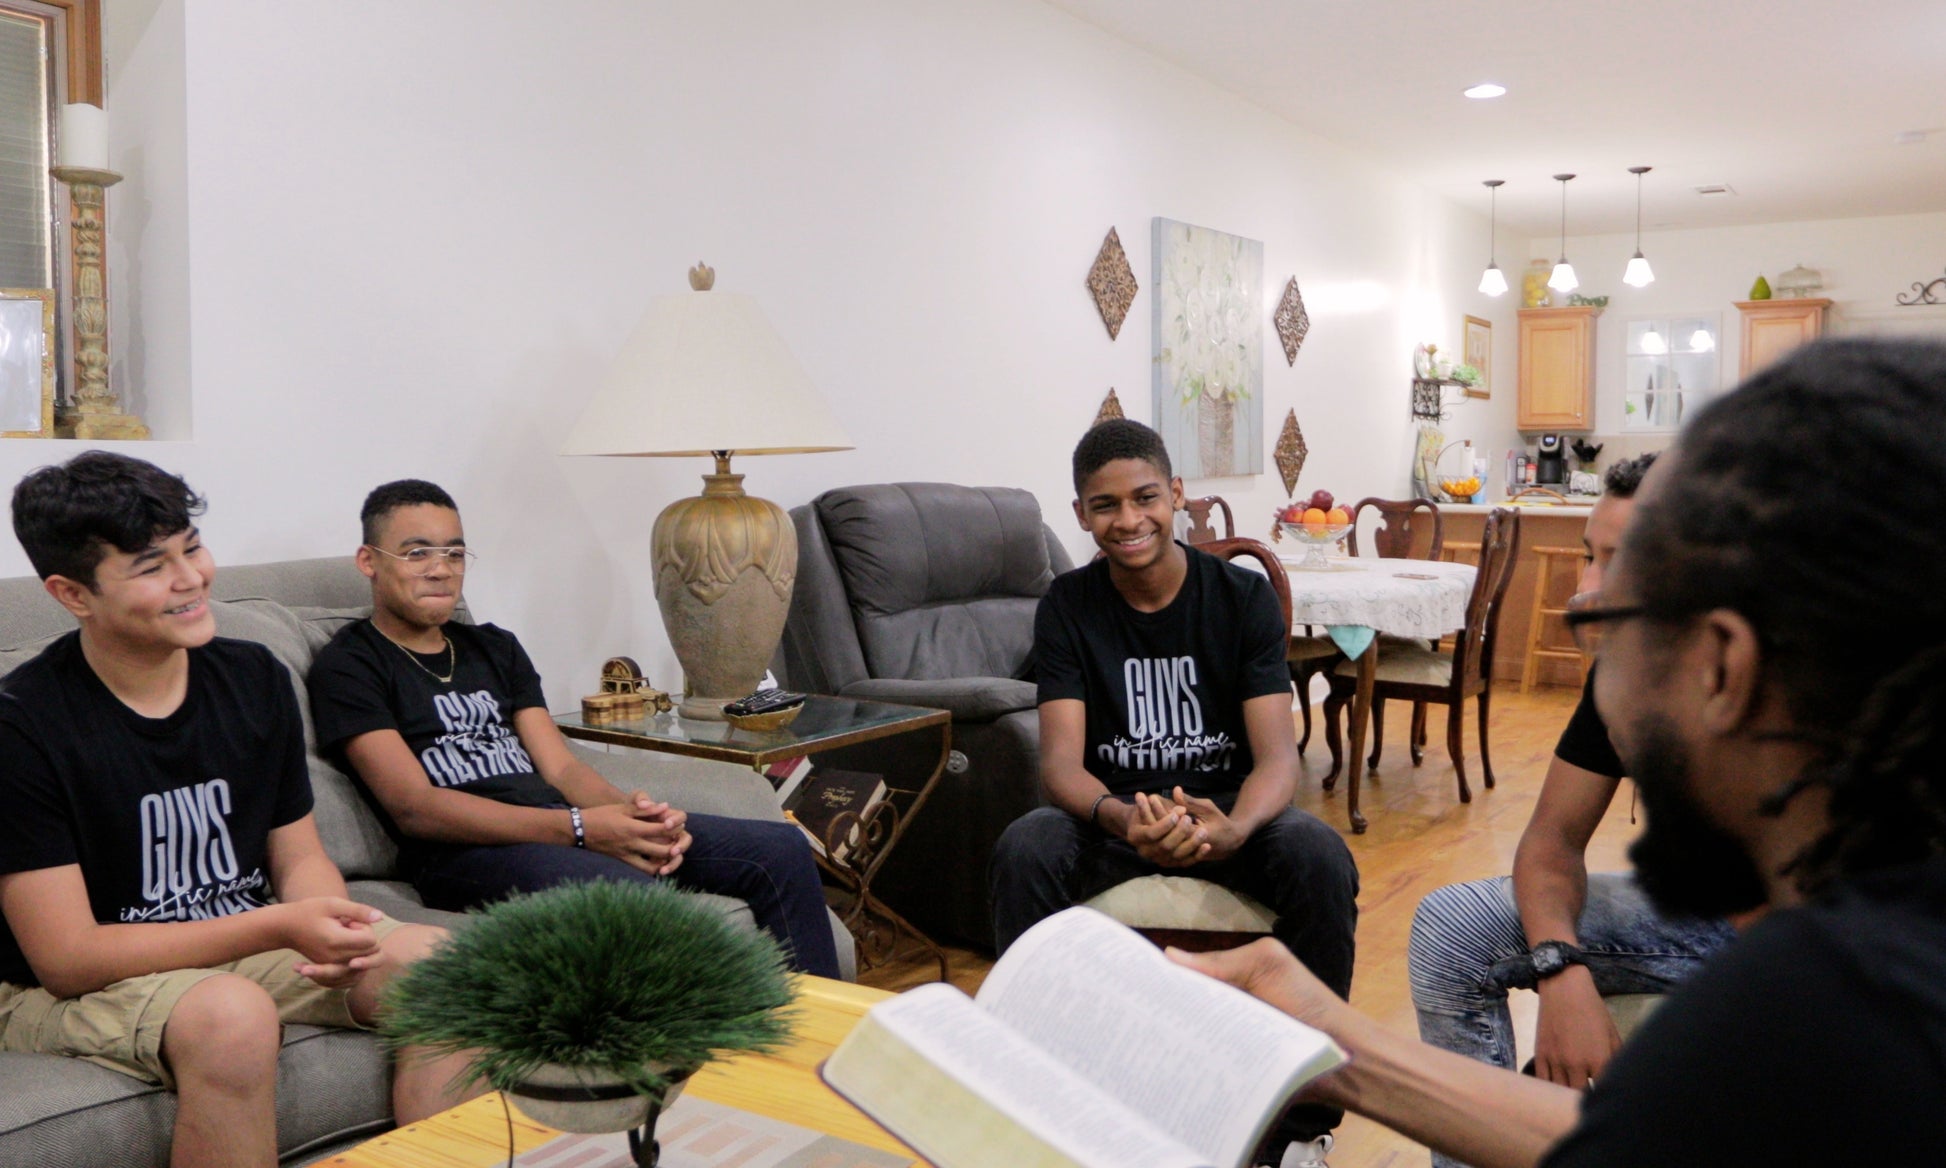 A boys small Life Group doing a Bible Study lesson together.